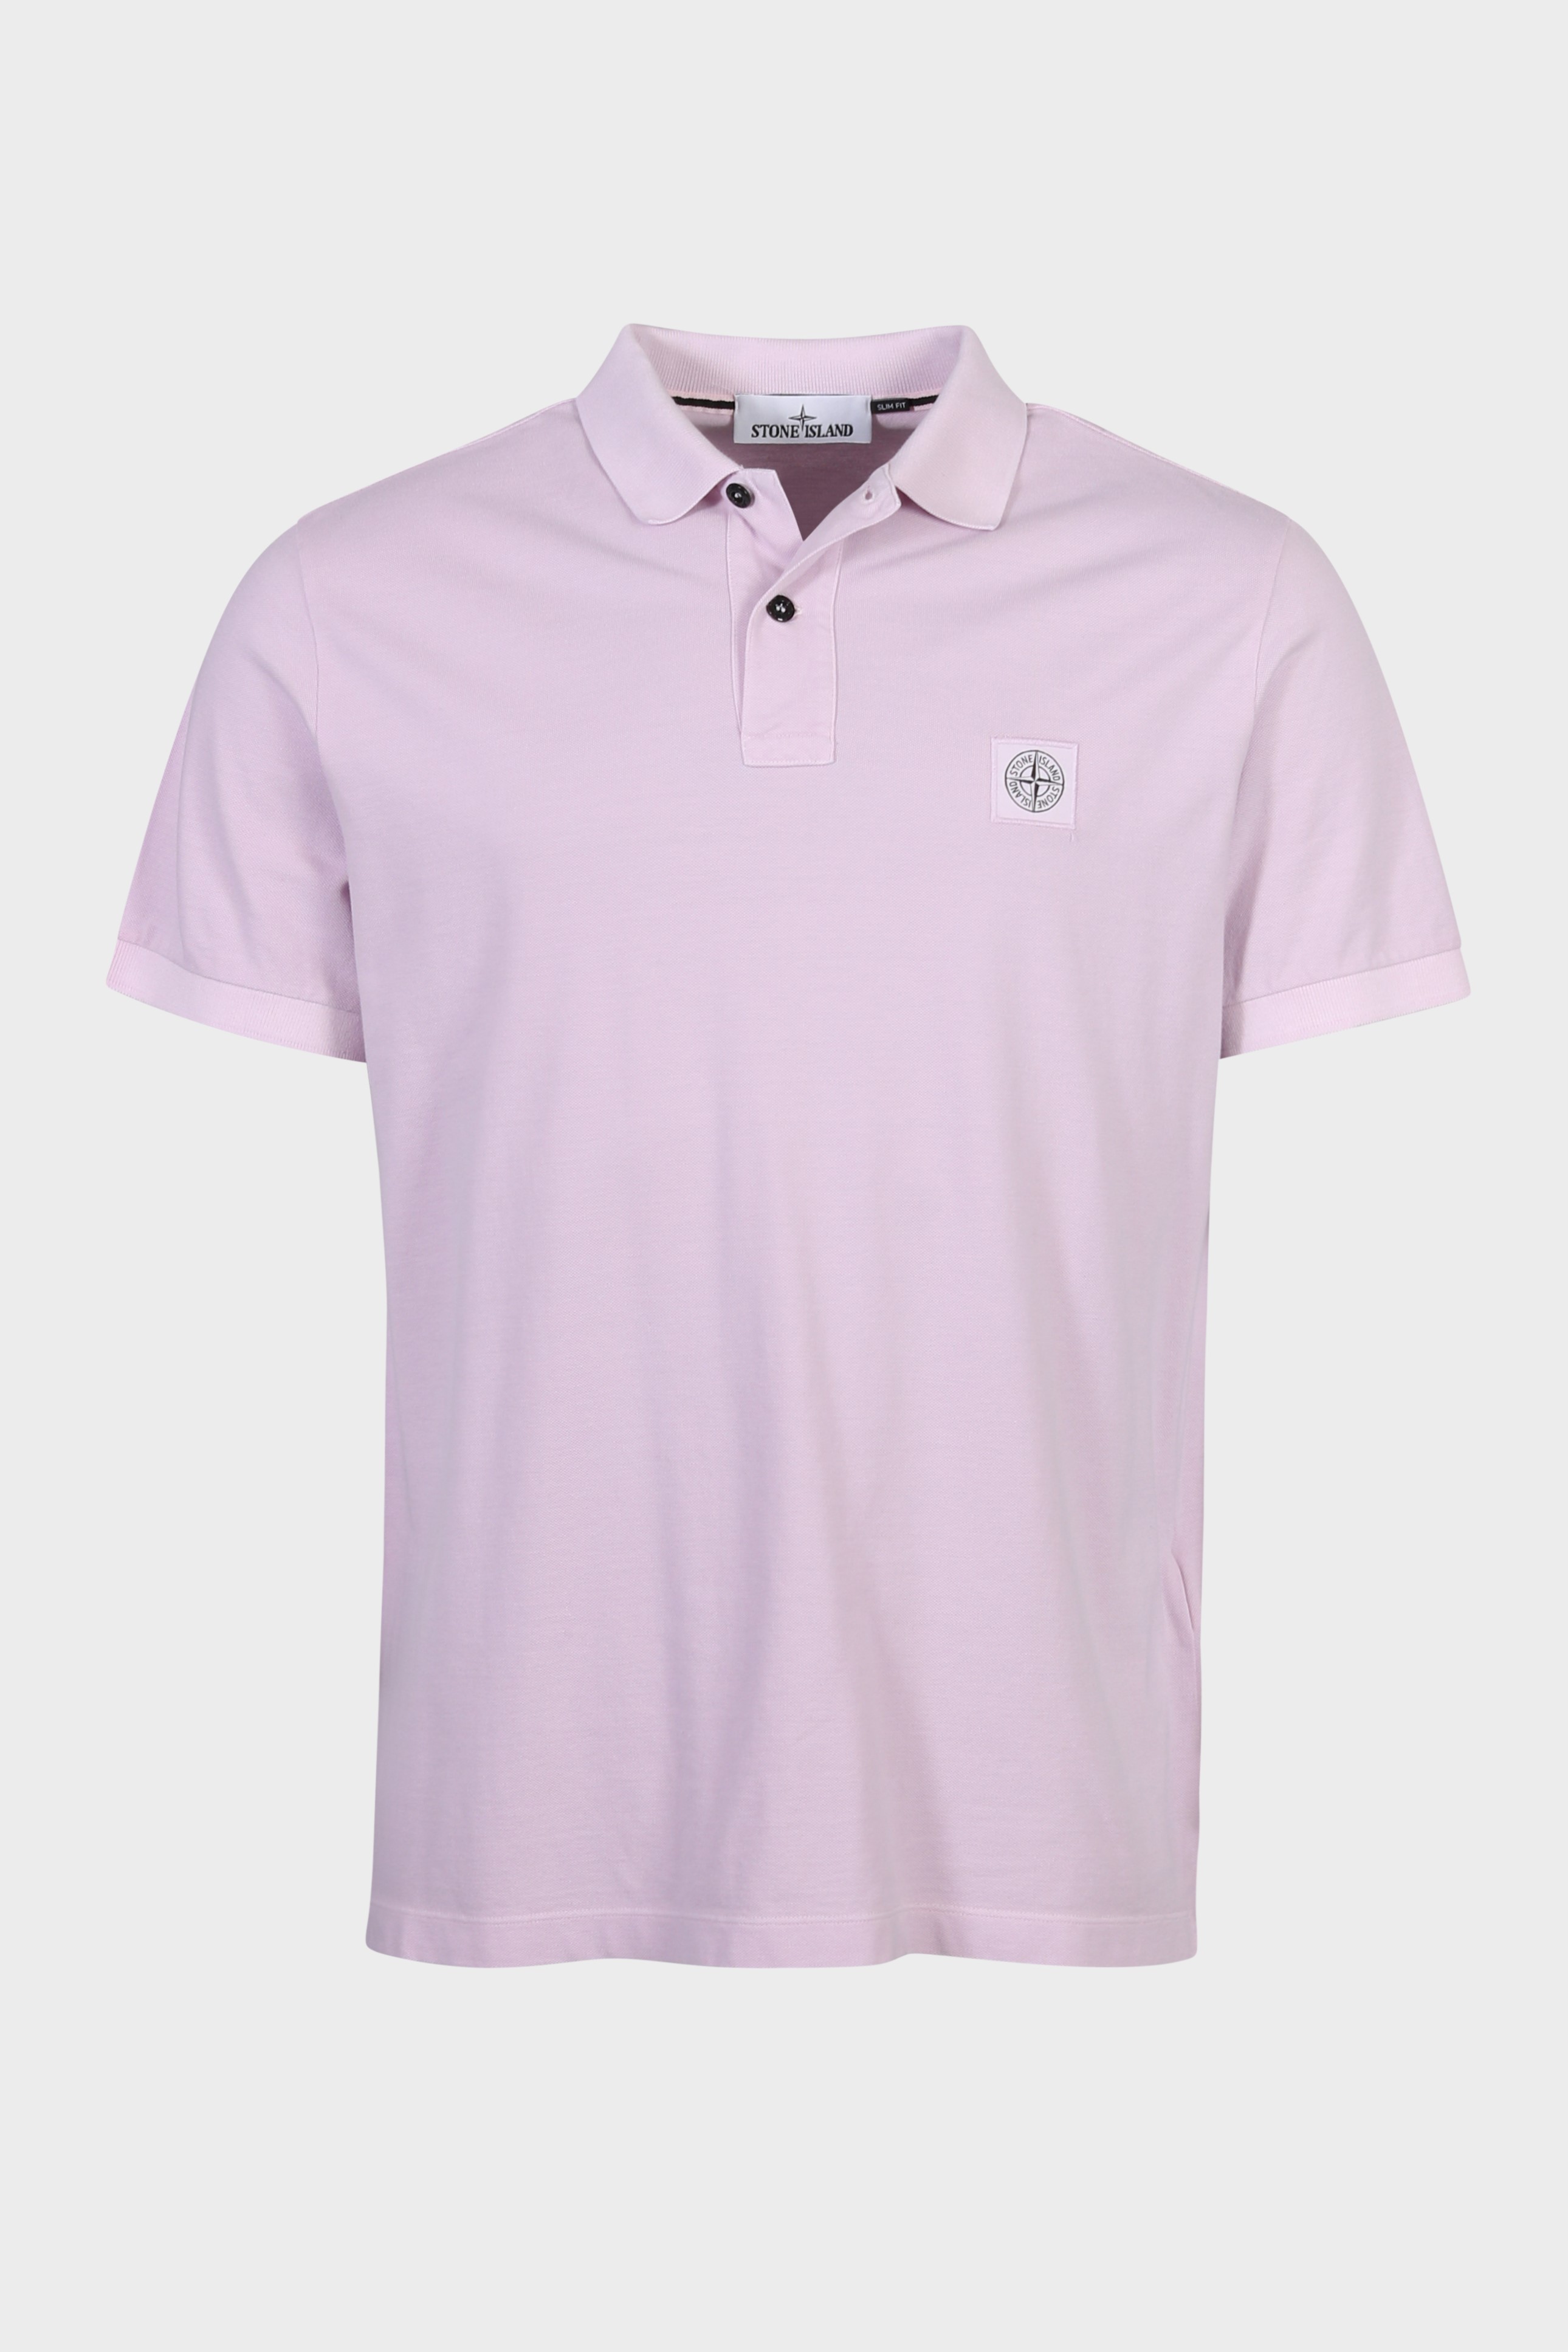 STONE ISLAND Polo Shirt in Light Pink M